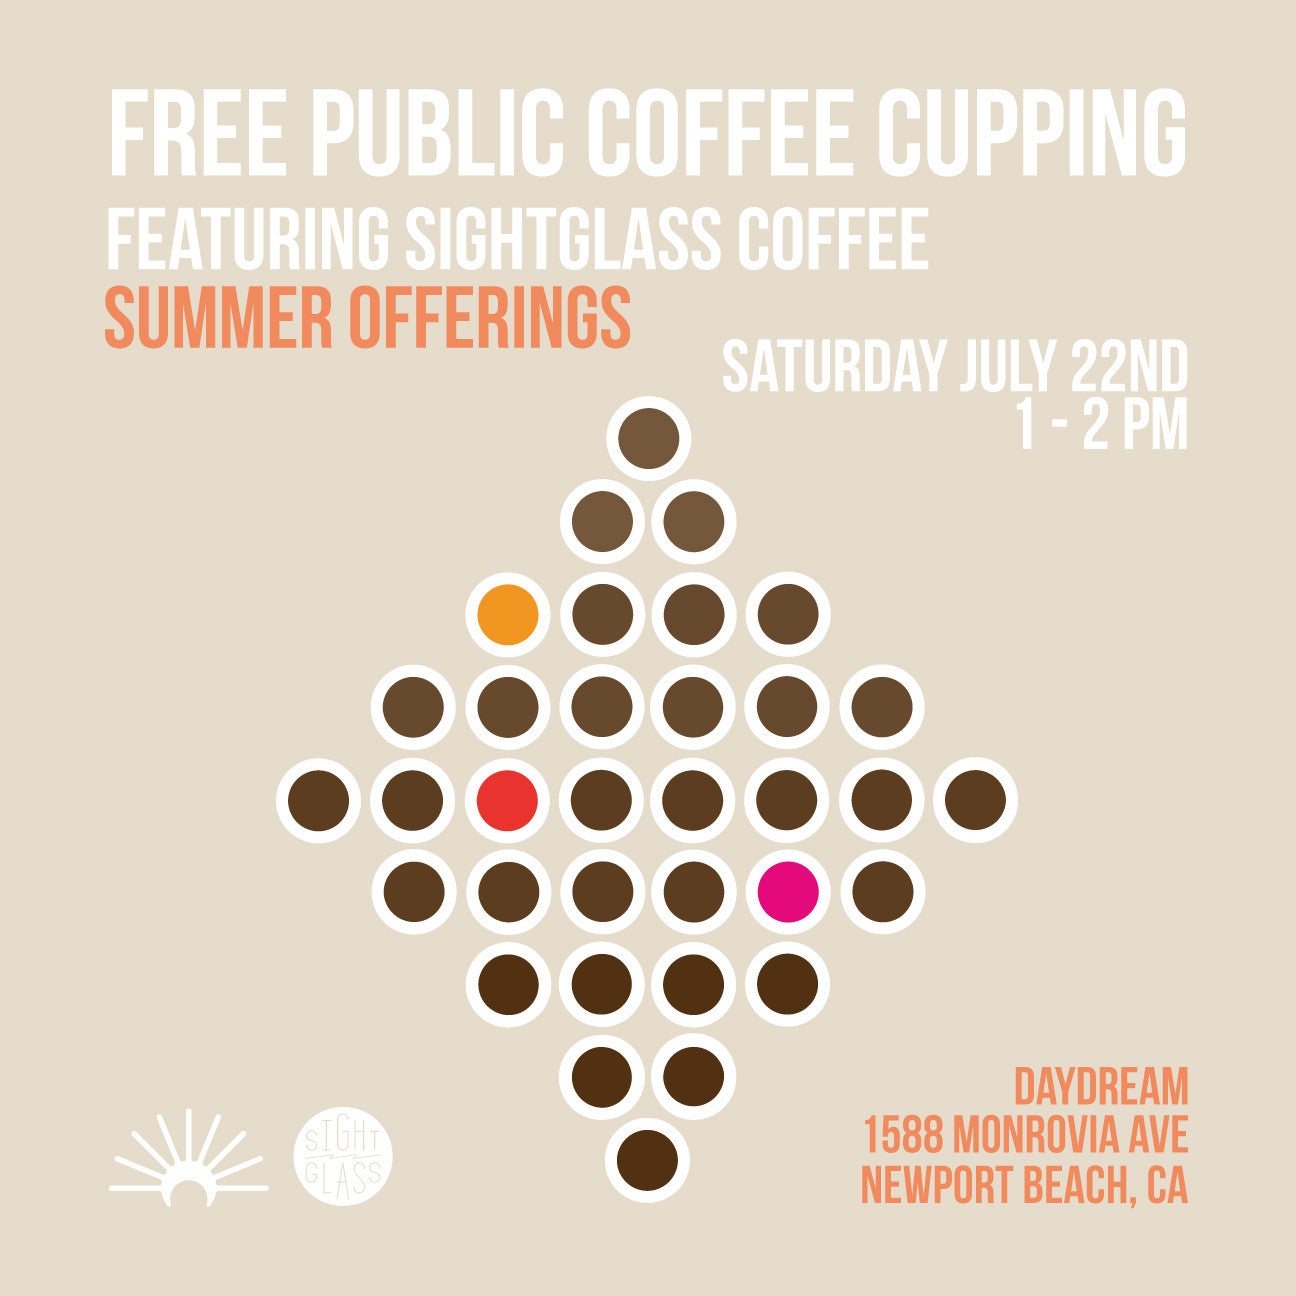 Free Public Coffee Cupping